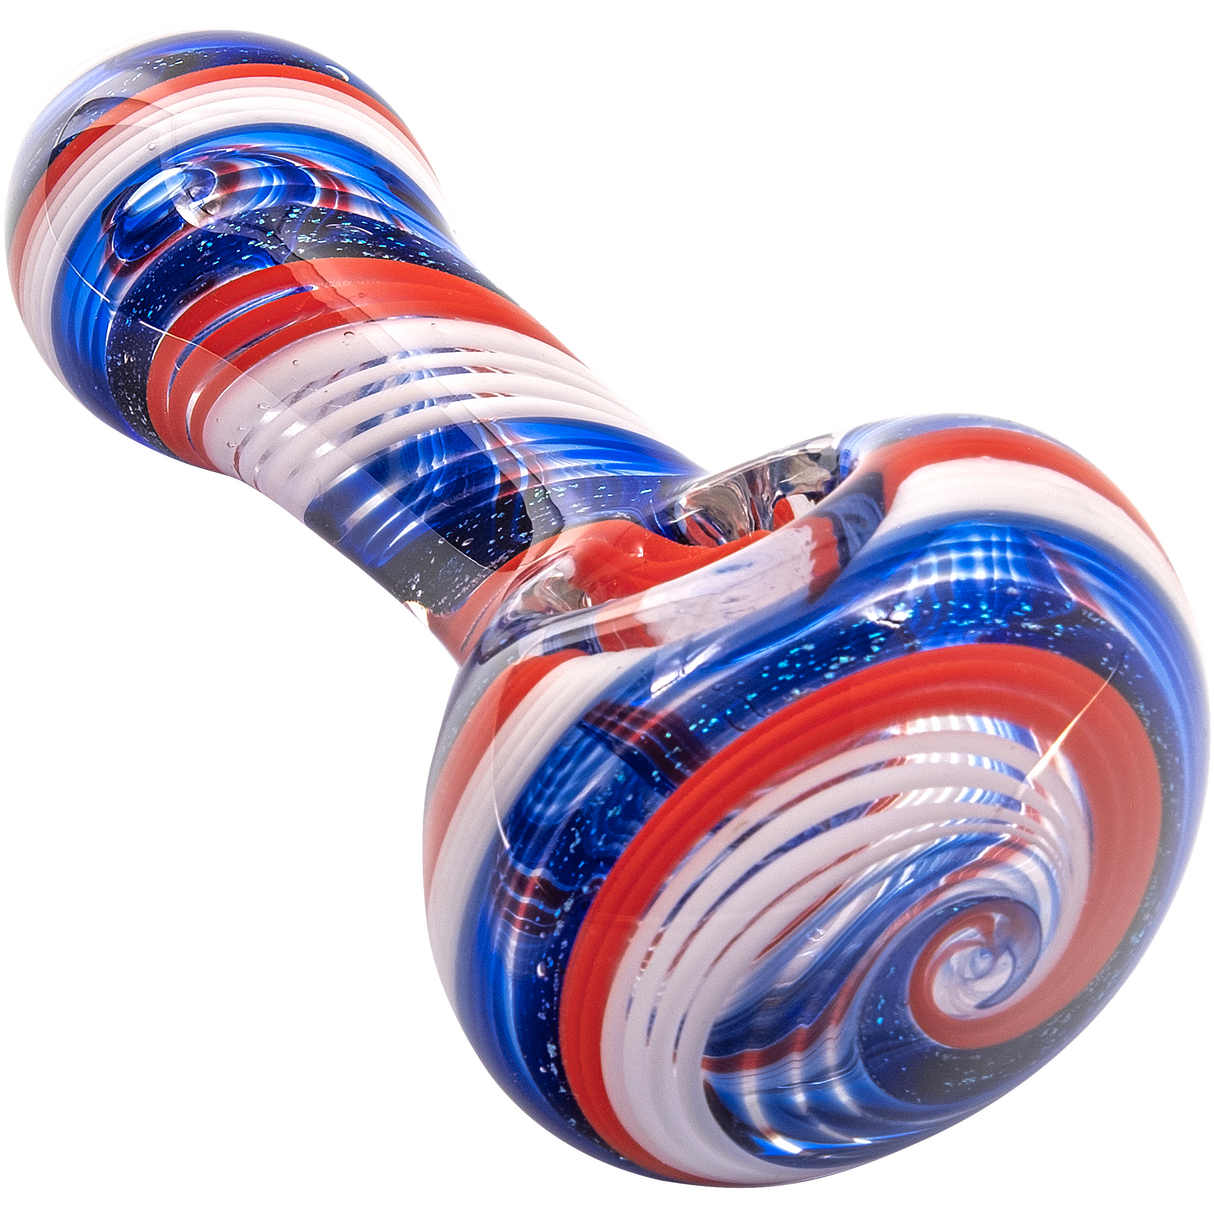 LA Pipes Stars and Stripes Glass Spoon Pipe, compact design with patriotic colors